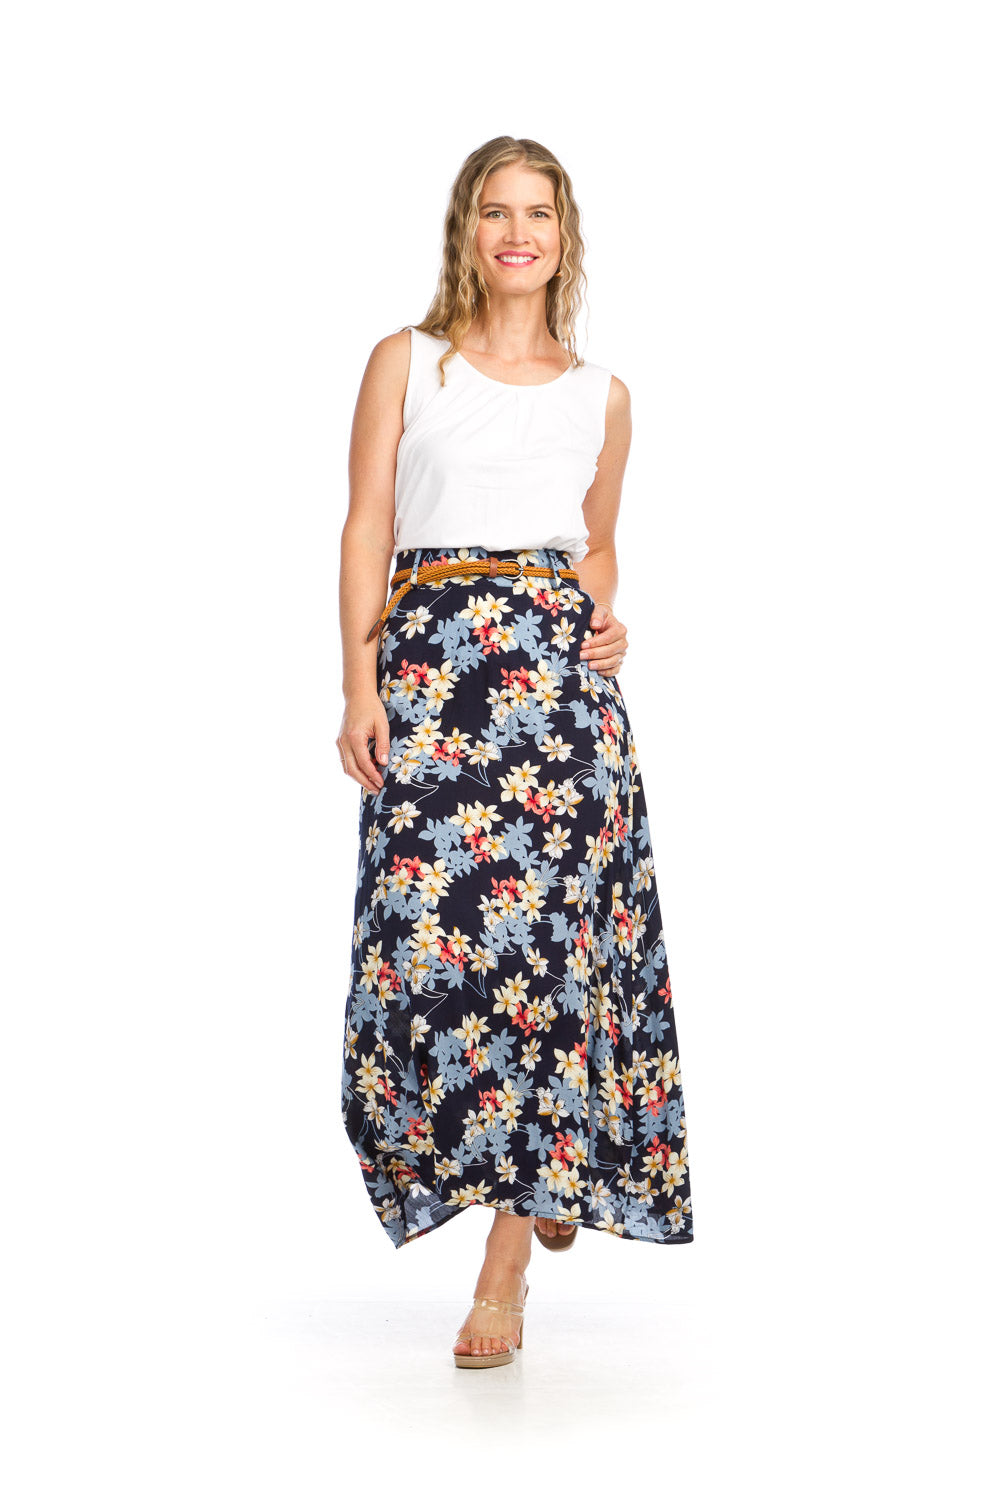 PS16902 NAVY Floral Maxi nSkirt with Braided Belt